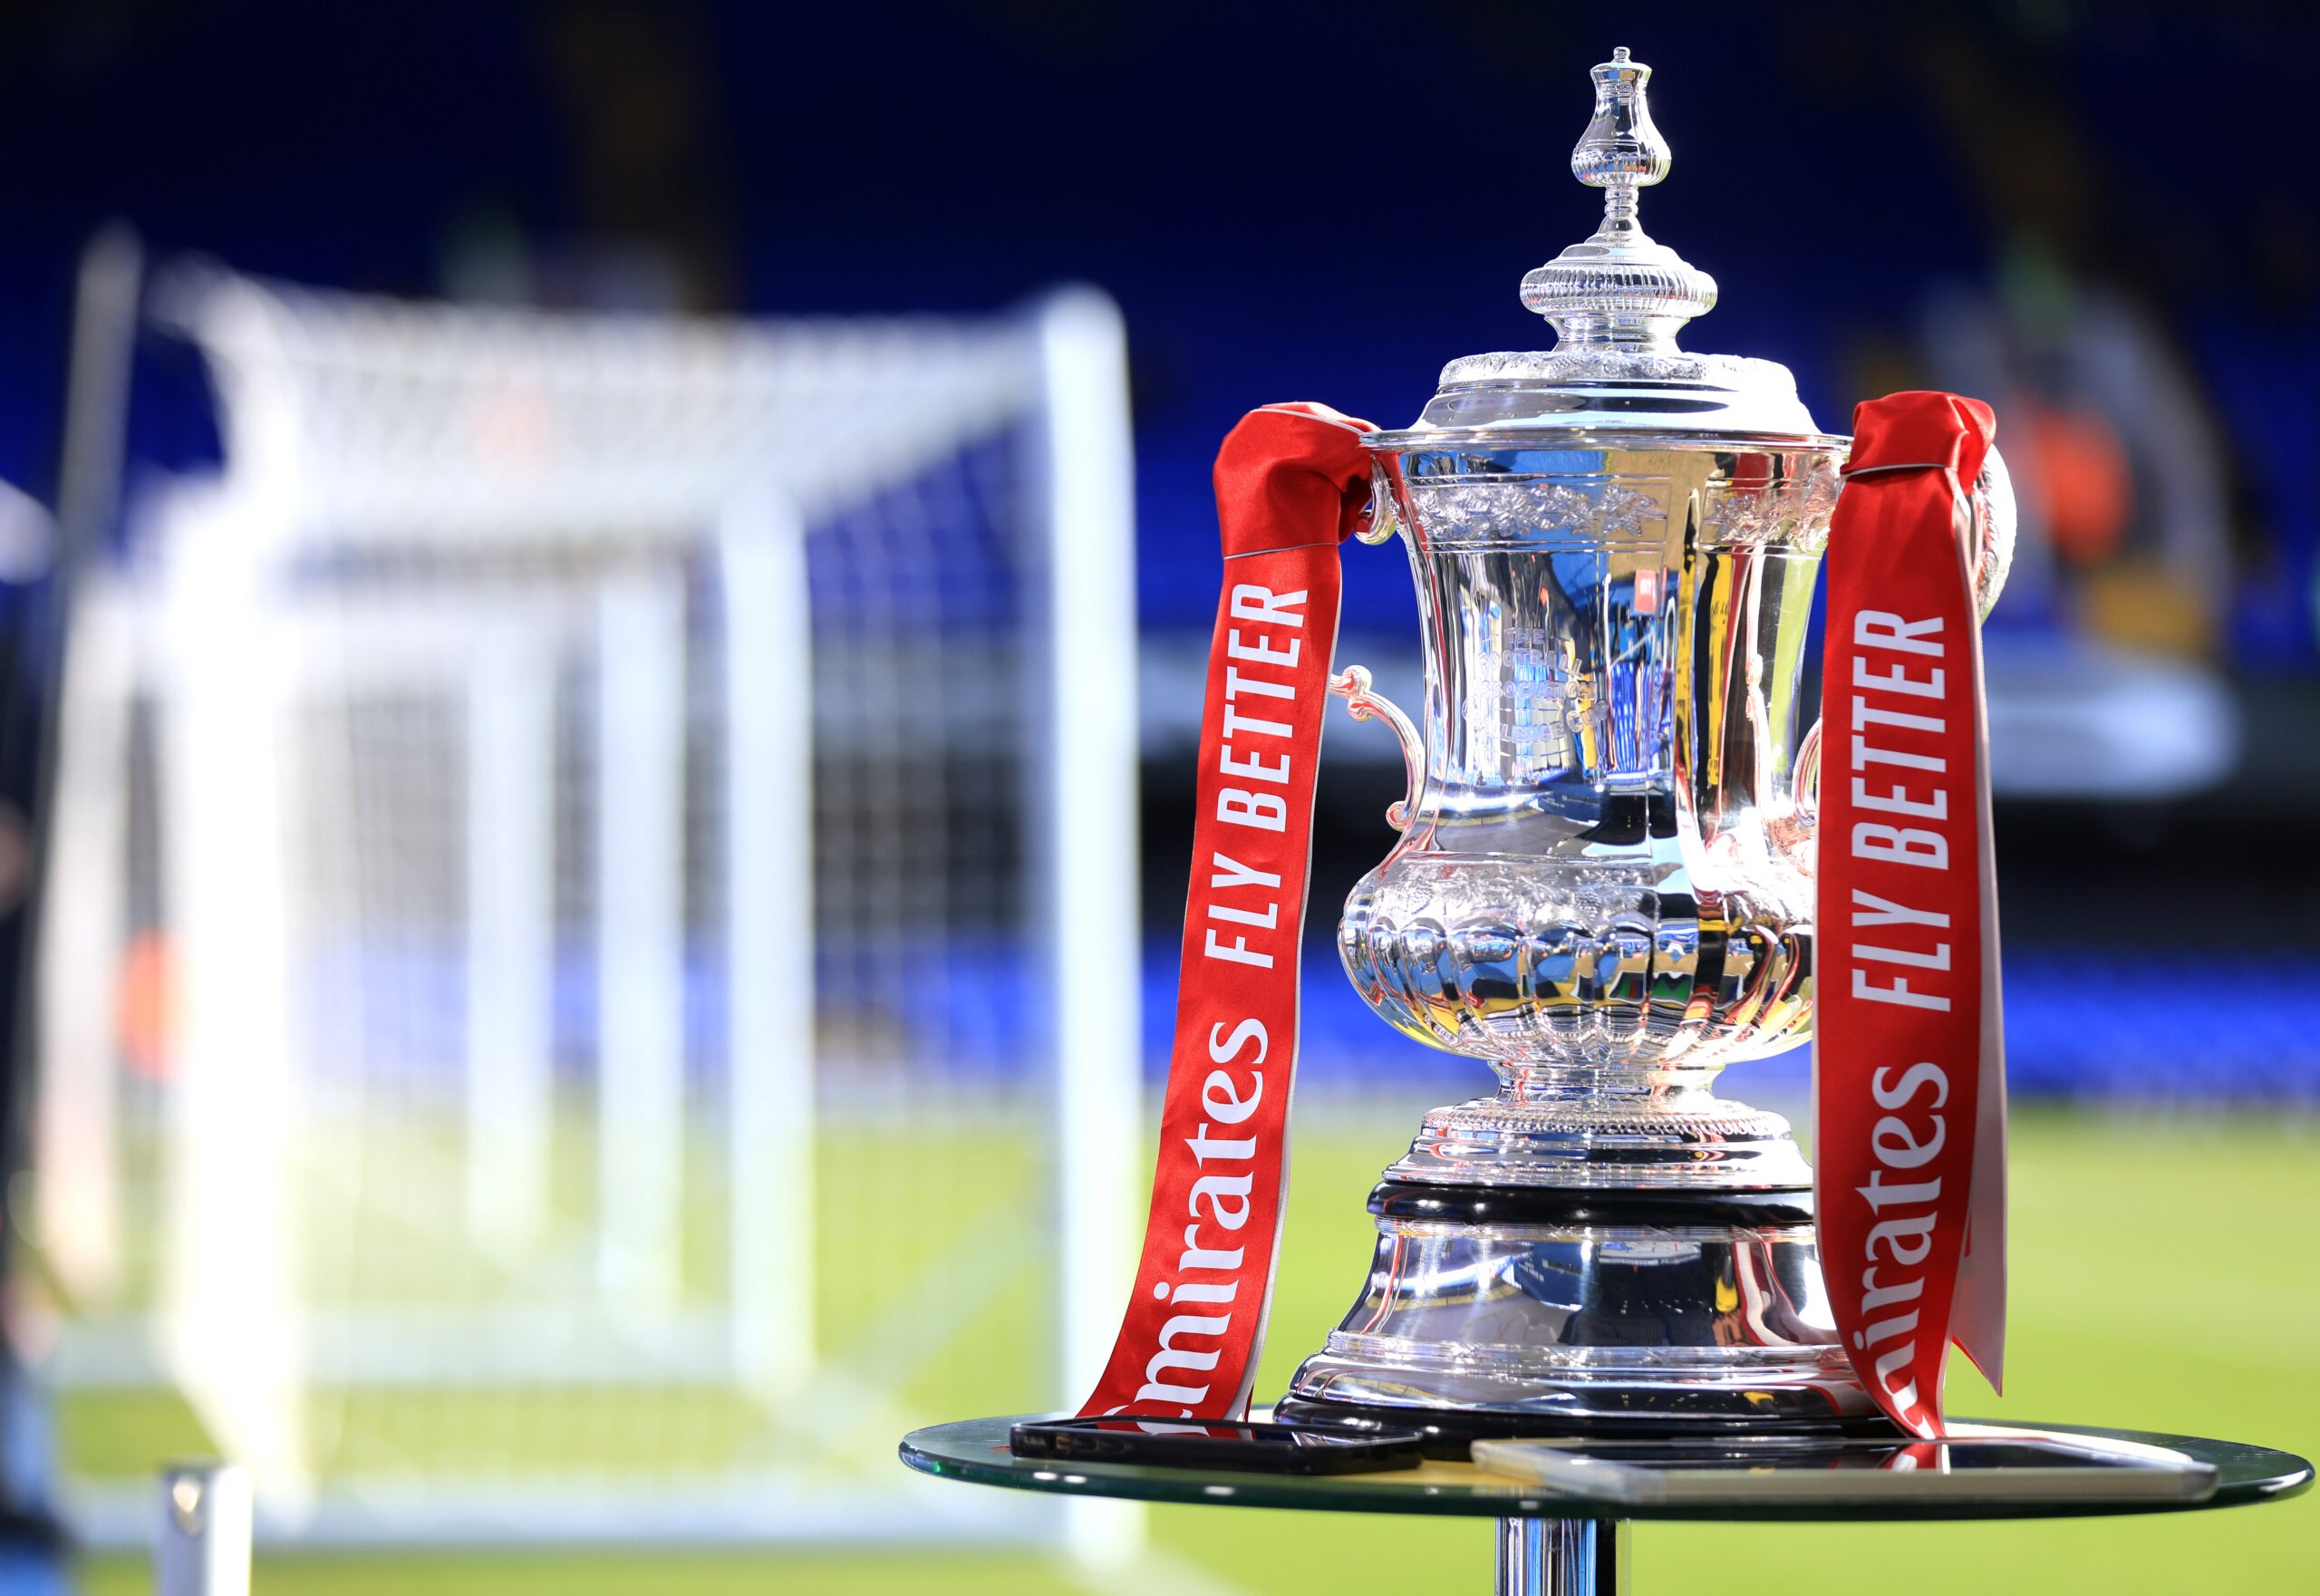 Live updates for the semi-finals of the FA Cup are available now.